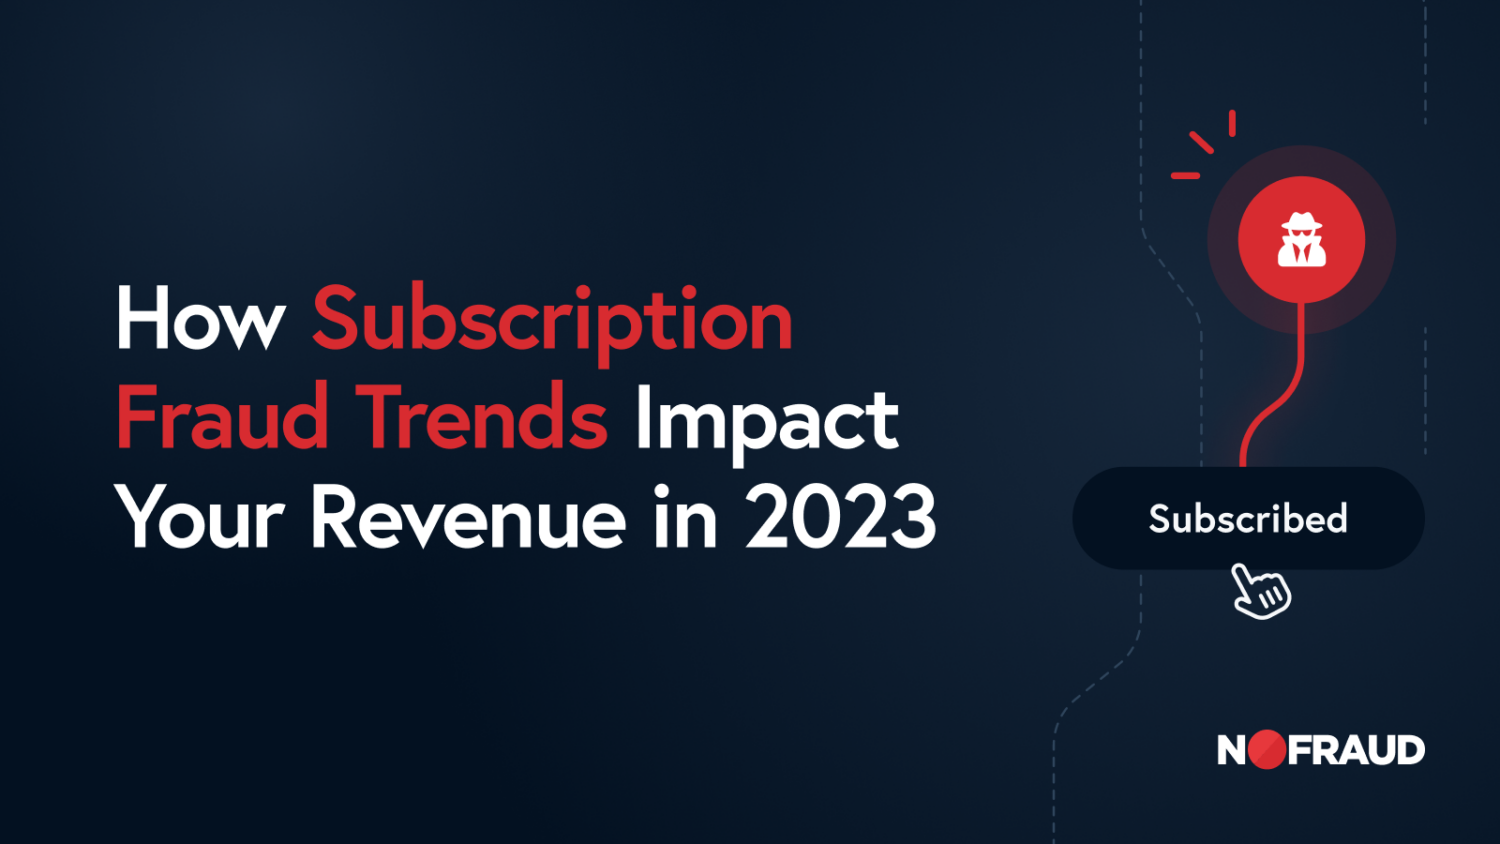 How Subscription Fraud Trends Impact Your Revenue in 2023